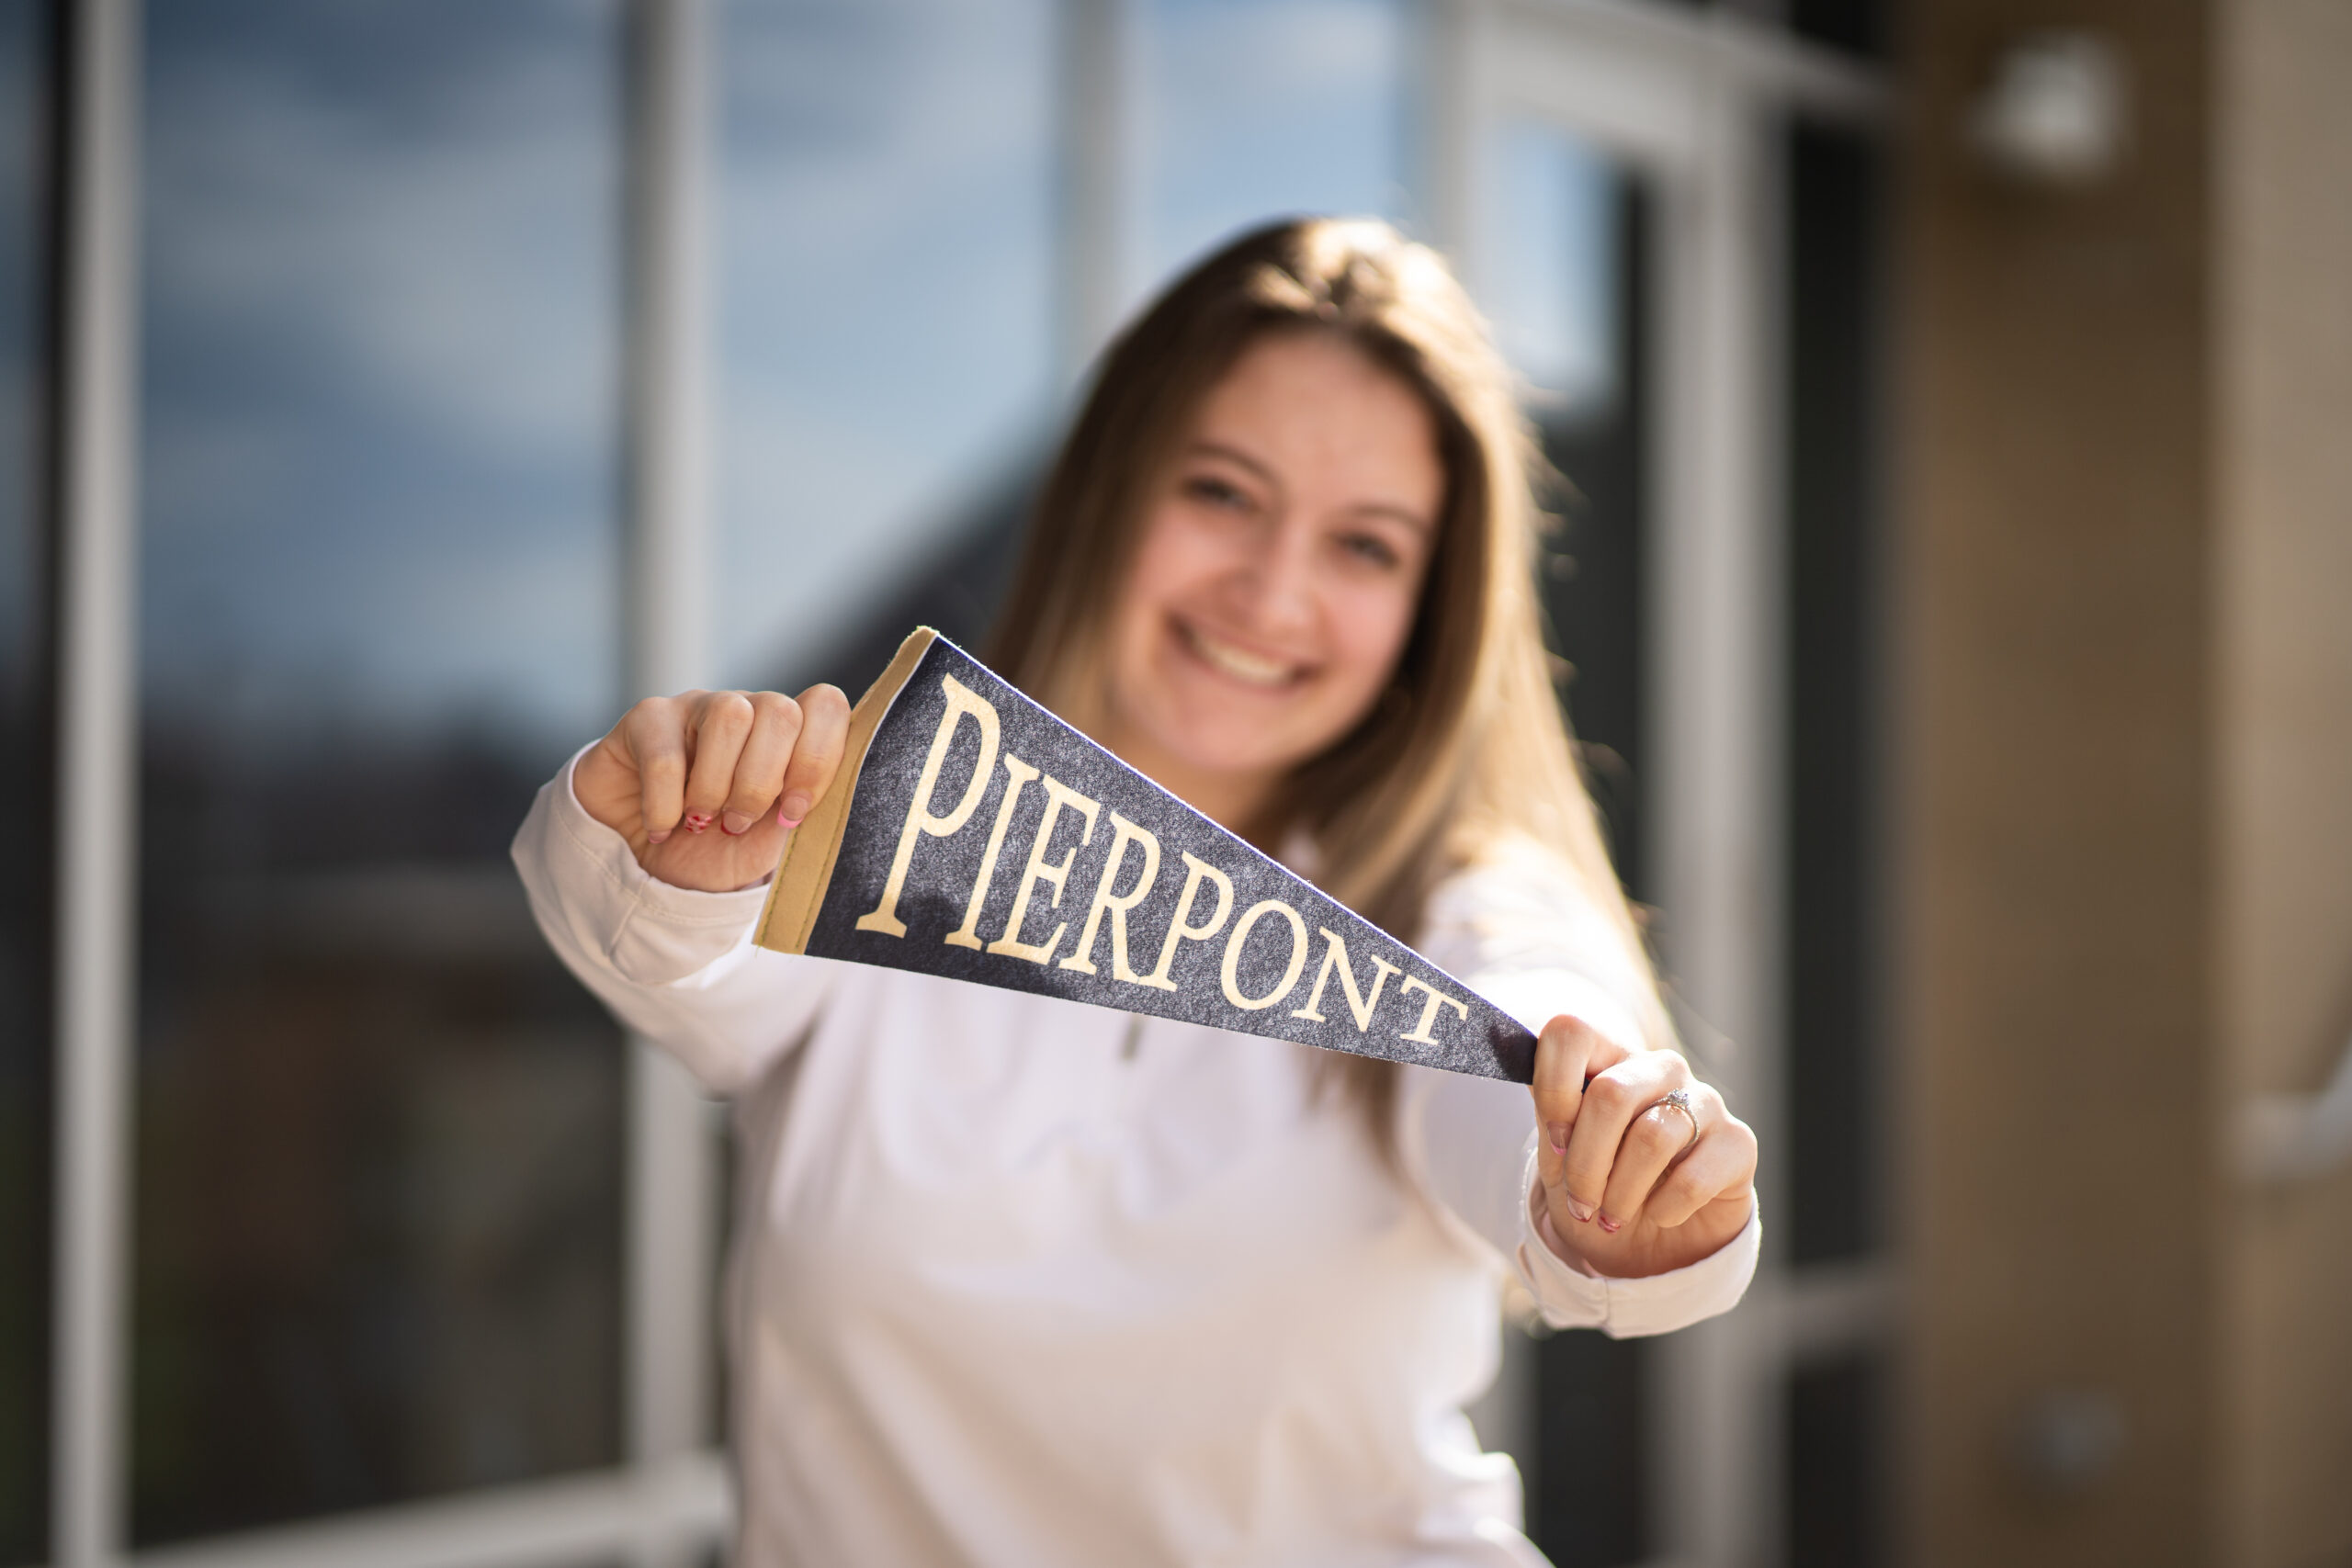 A student is pictured holding a Pierpont pennant.